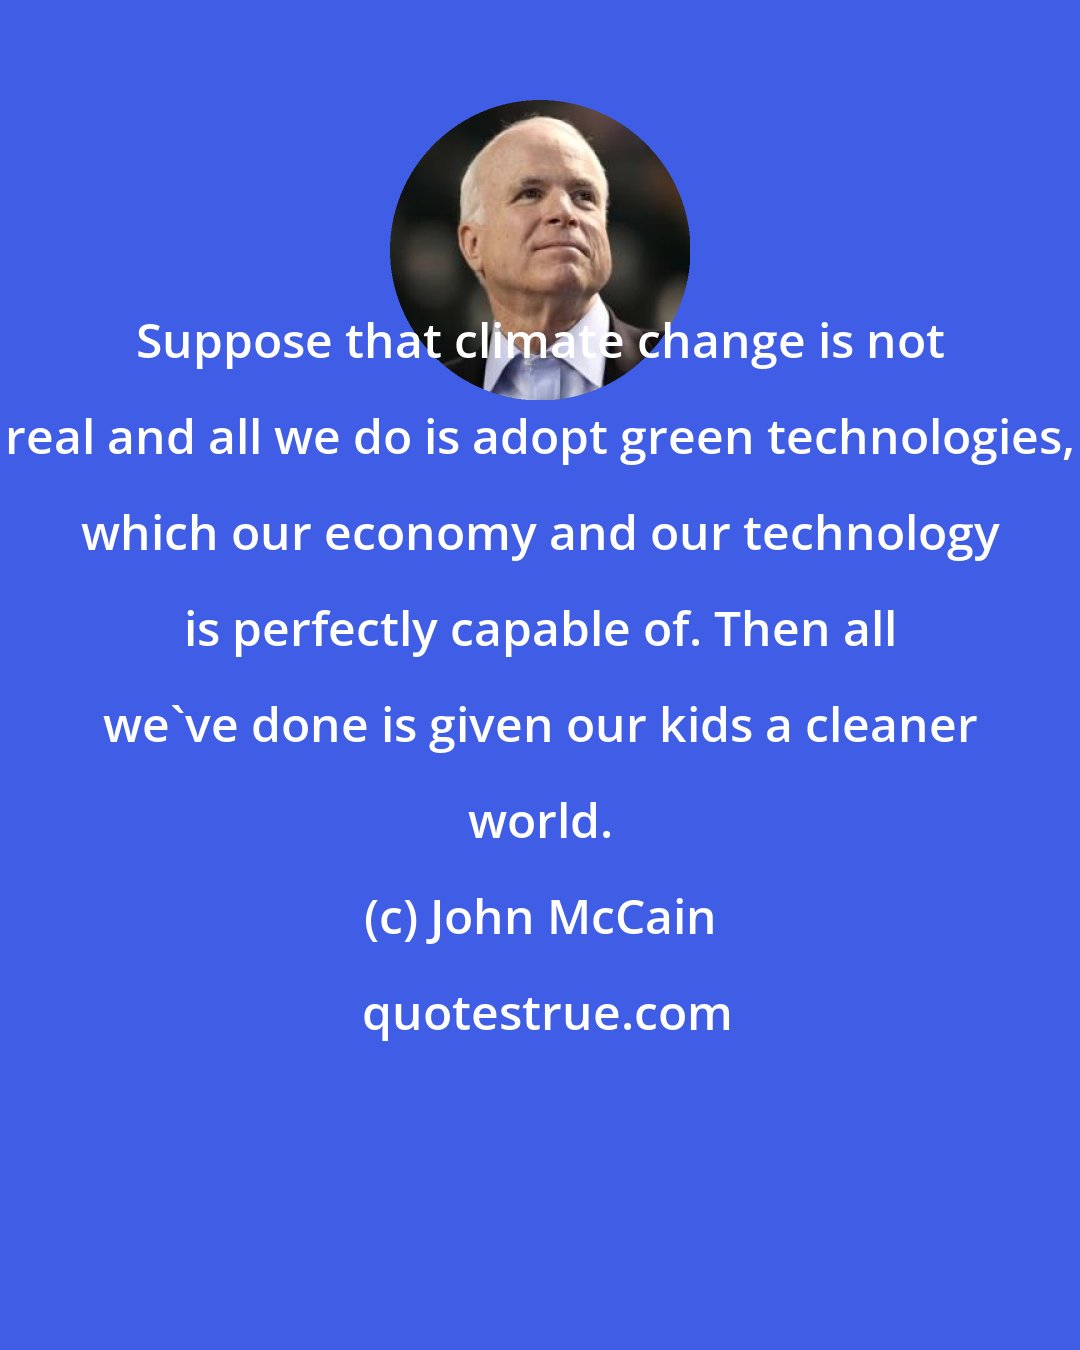 John McCain: Suppose that climate change is not real and all we do is adopt green technologies, which our economy and our technology is perfectly capable of. Then all we've done is given our kids a cleaner world.